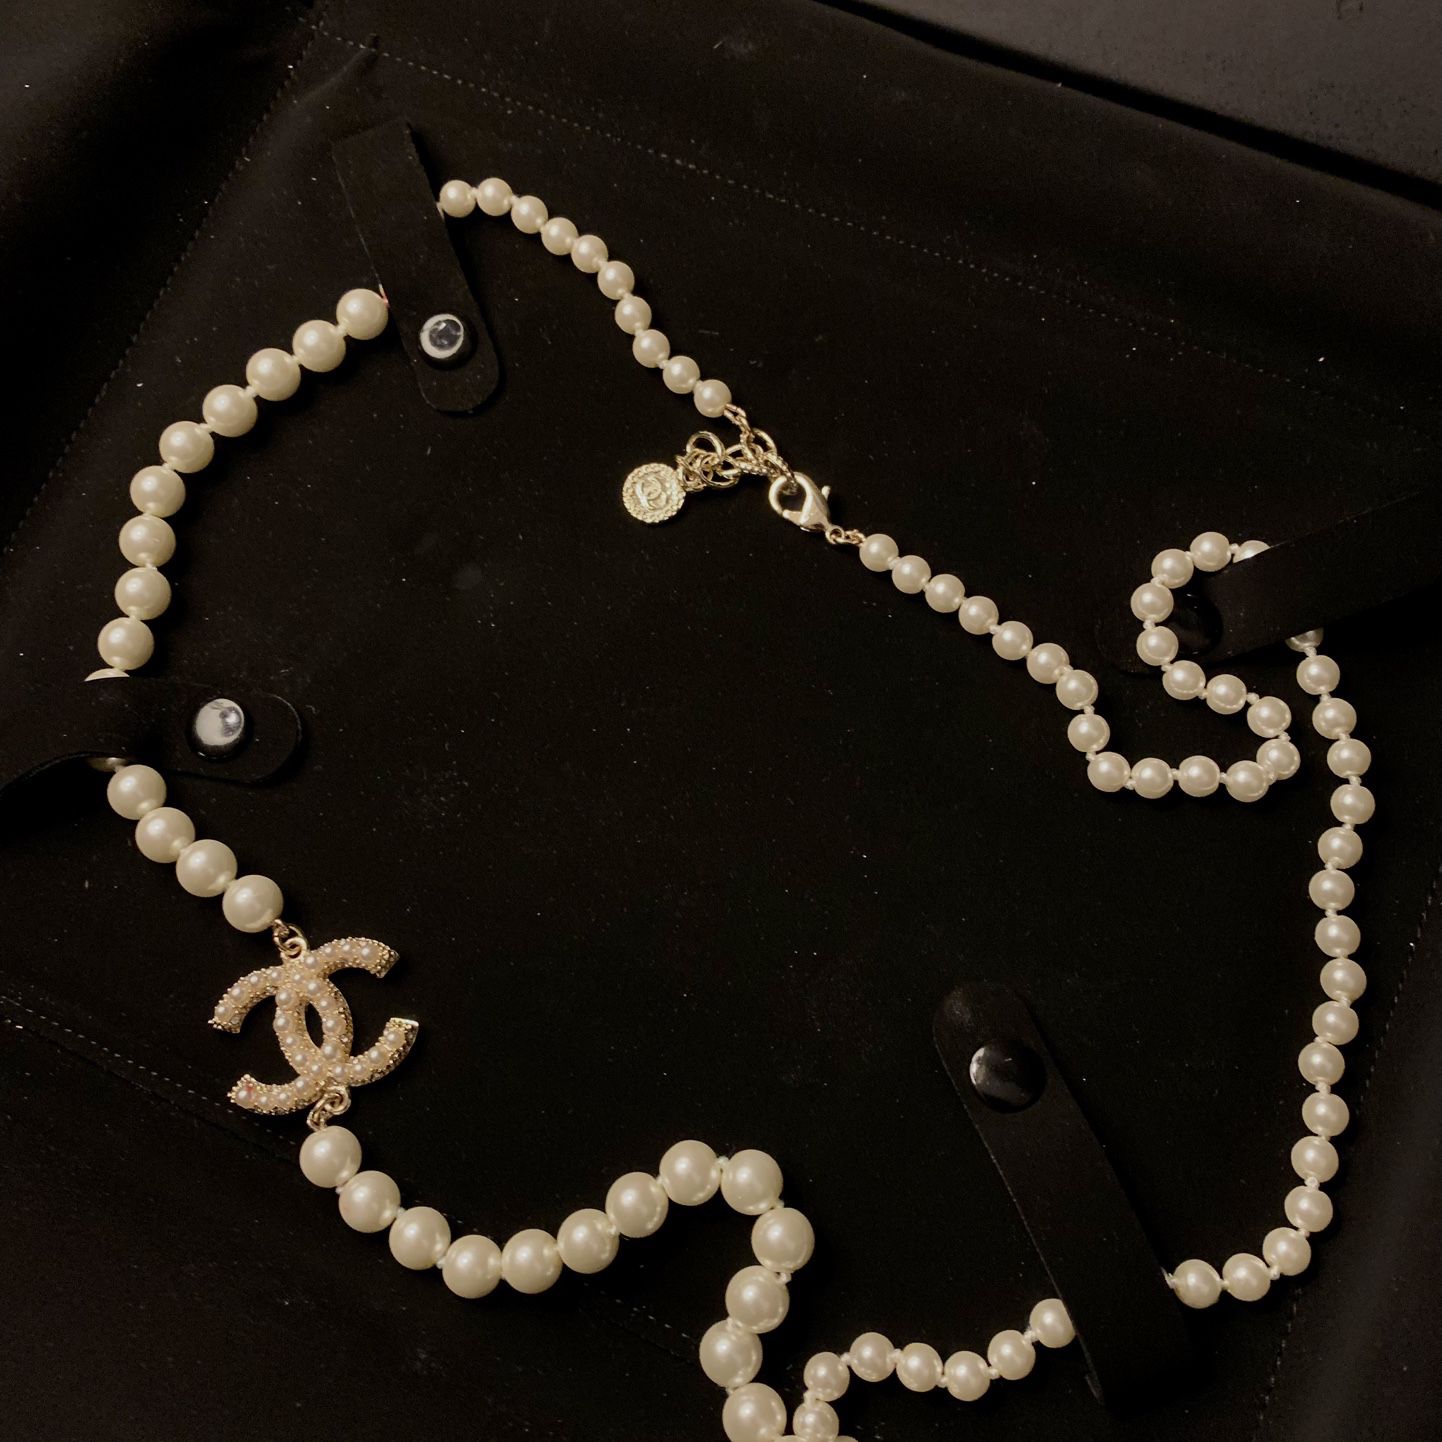 CHANEL, Jewelry, Vintage Chanel Large Faux Pearl Gold Station Long  Necklace